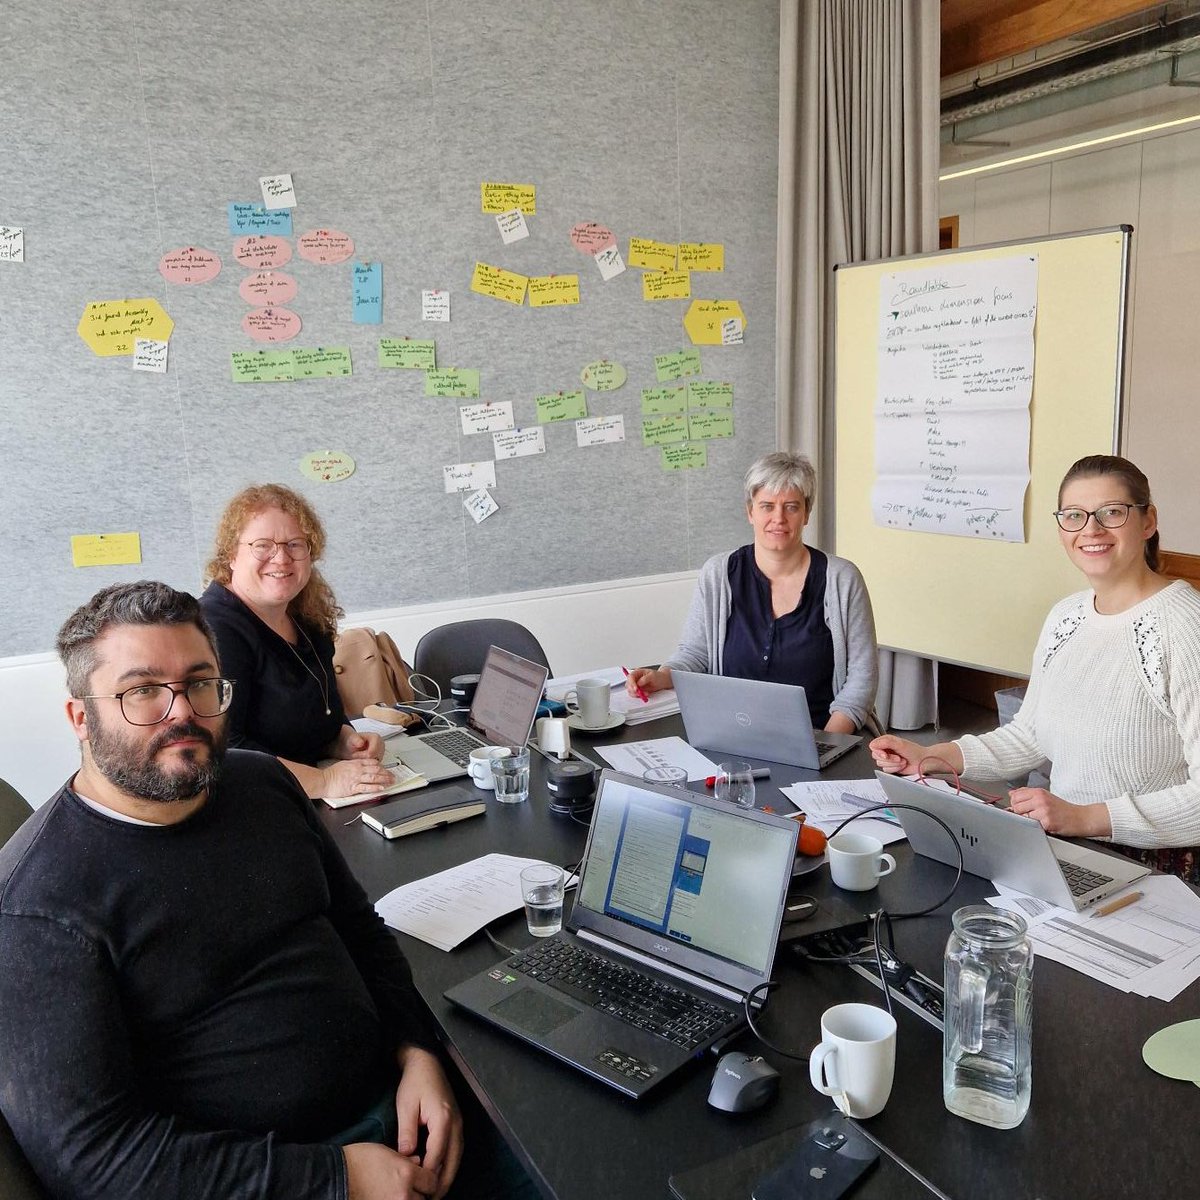 Planning and strategising for 2024 & beyond: EMBRACE's project management met to organise upcoming activites and events. We're excited for the field research results & analyis within the consortium and with stakeholders coming up this year! @concentris_EU @BerghofFnd @Uni_WUE